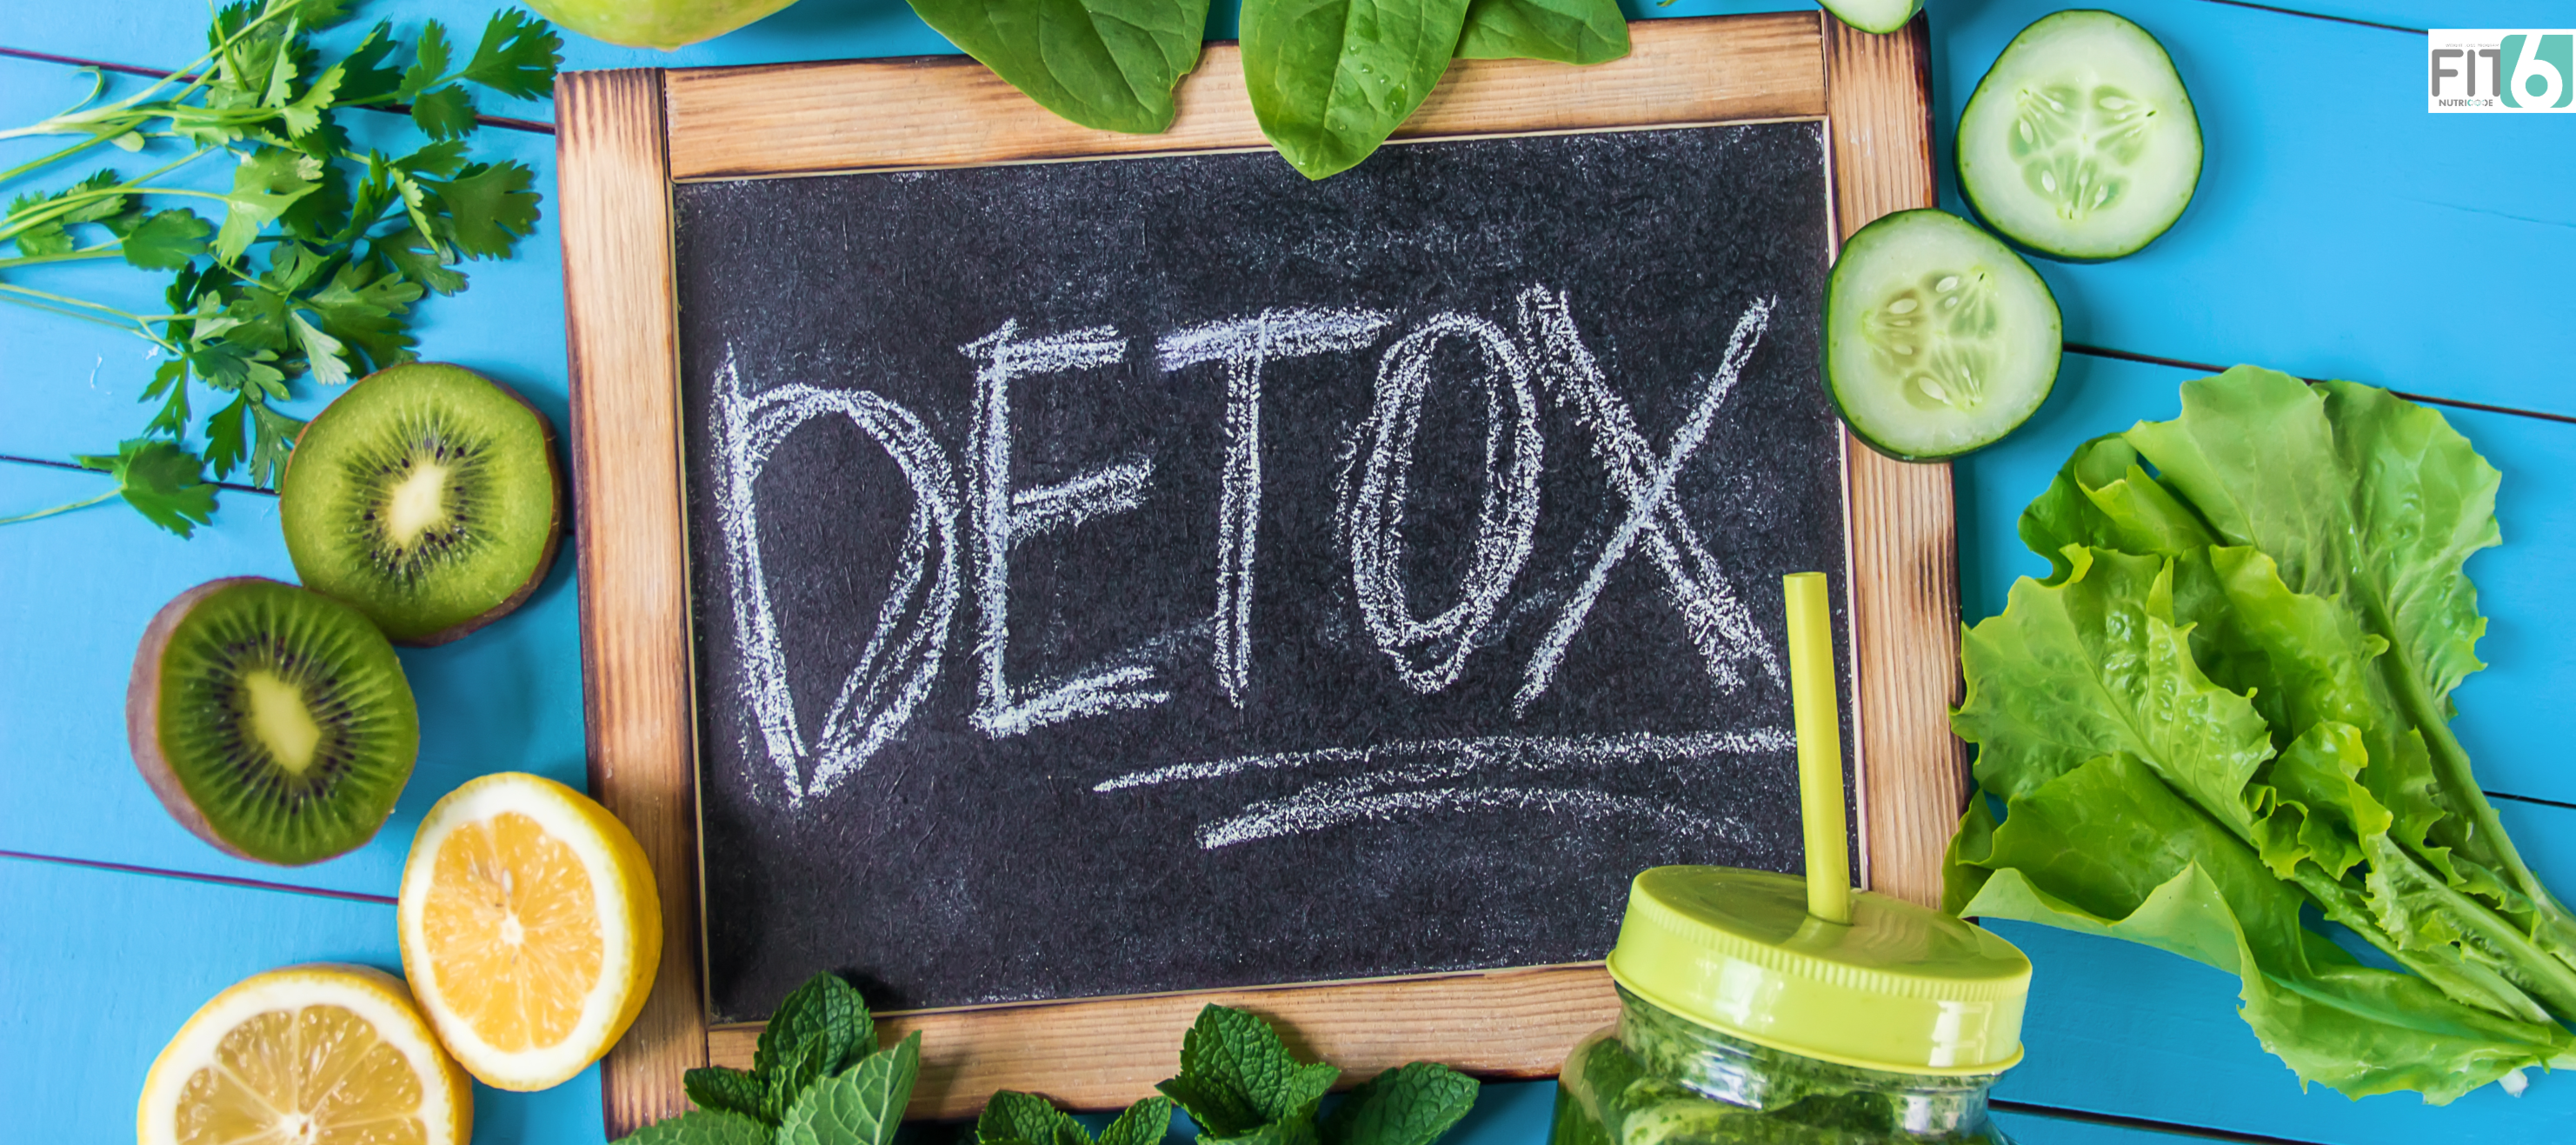 Detox - one of the mandatory elements of FIT6